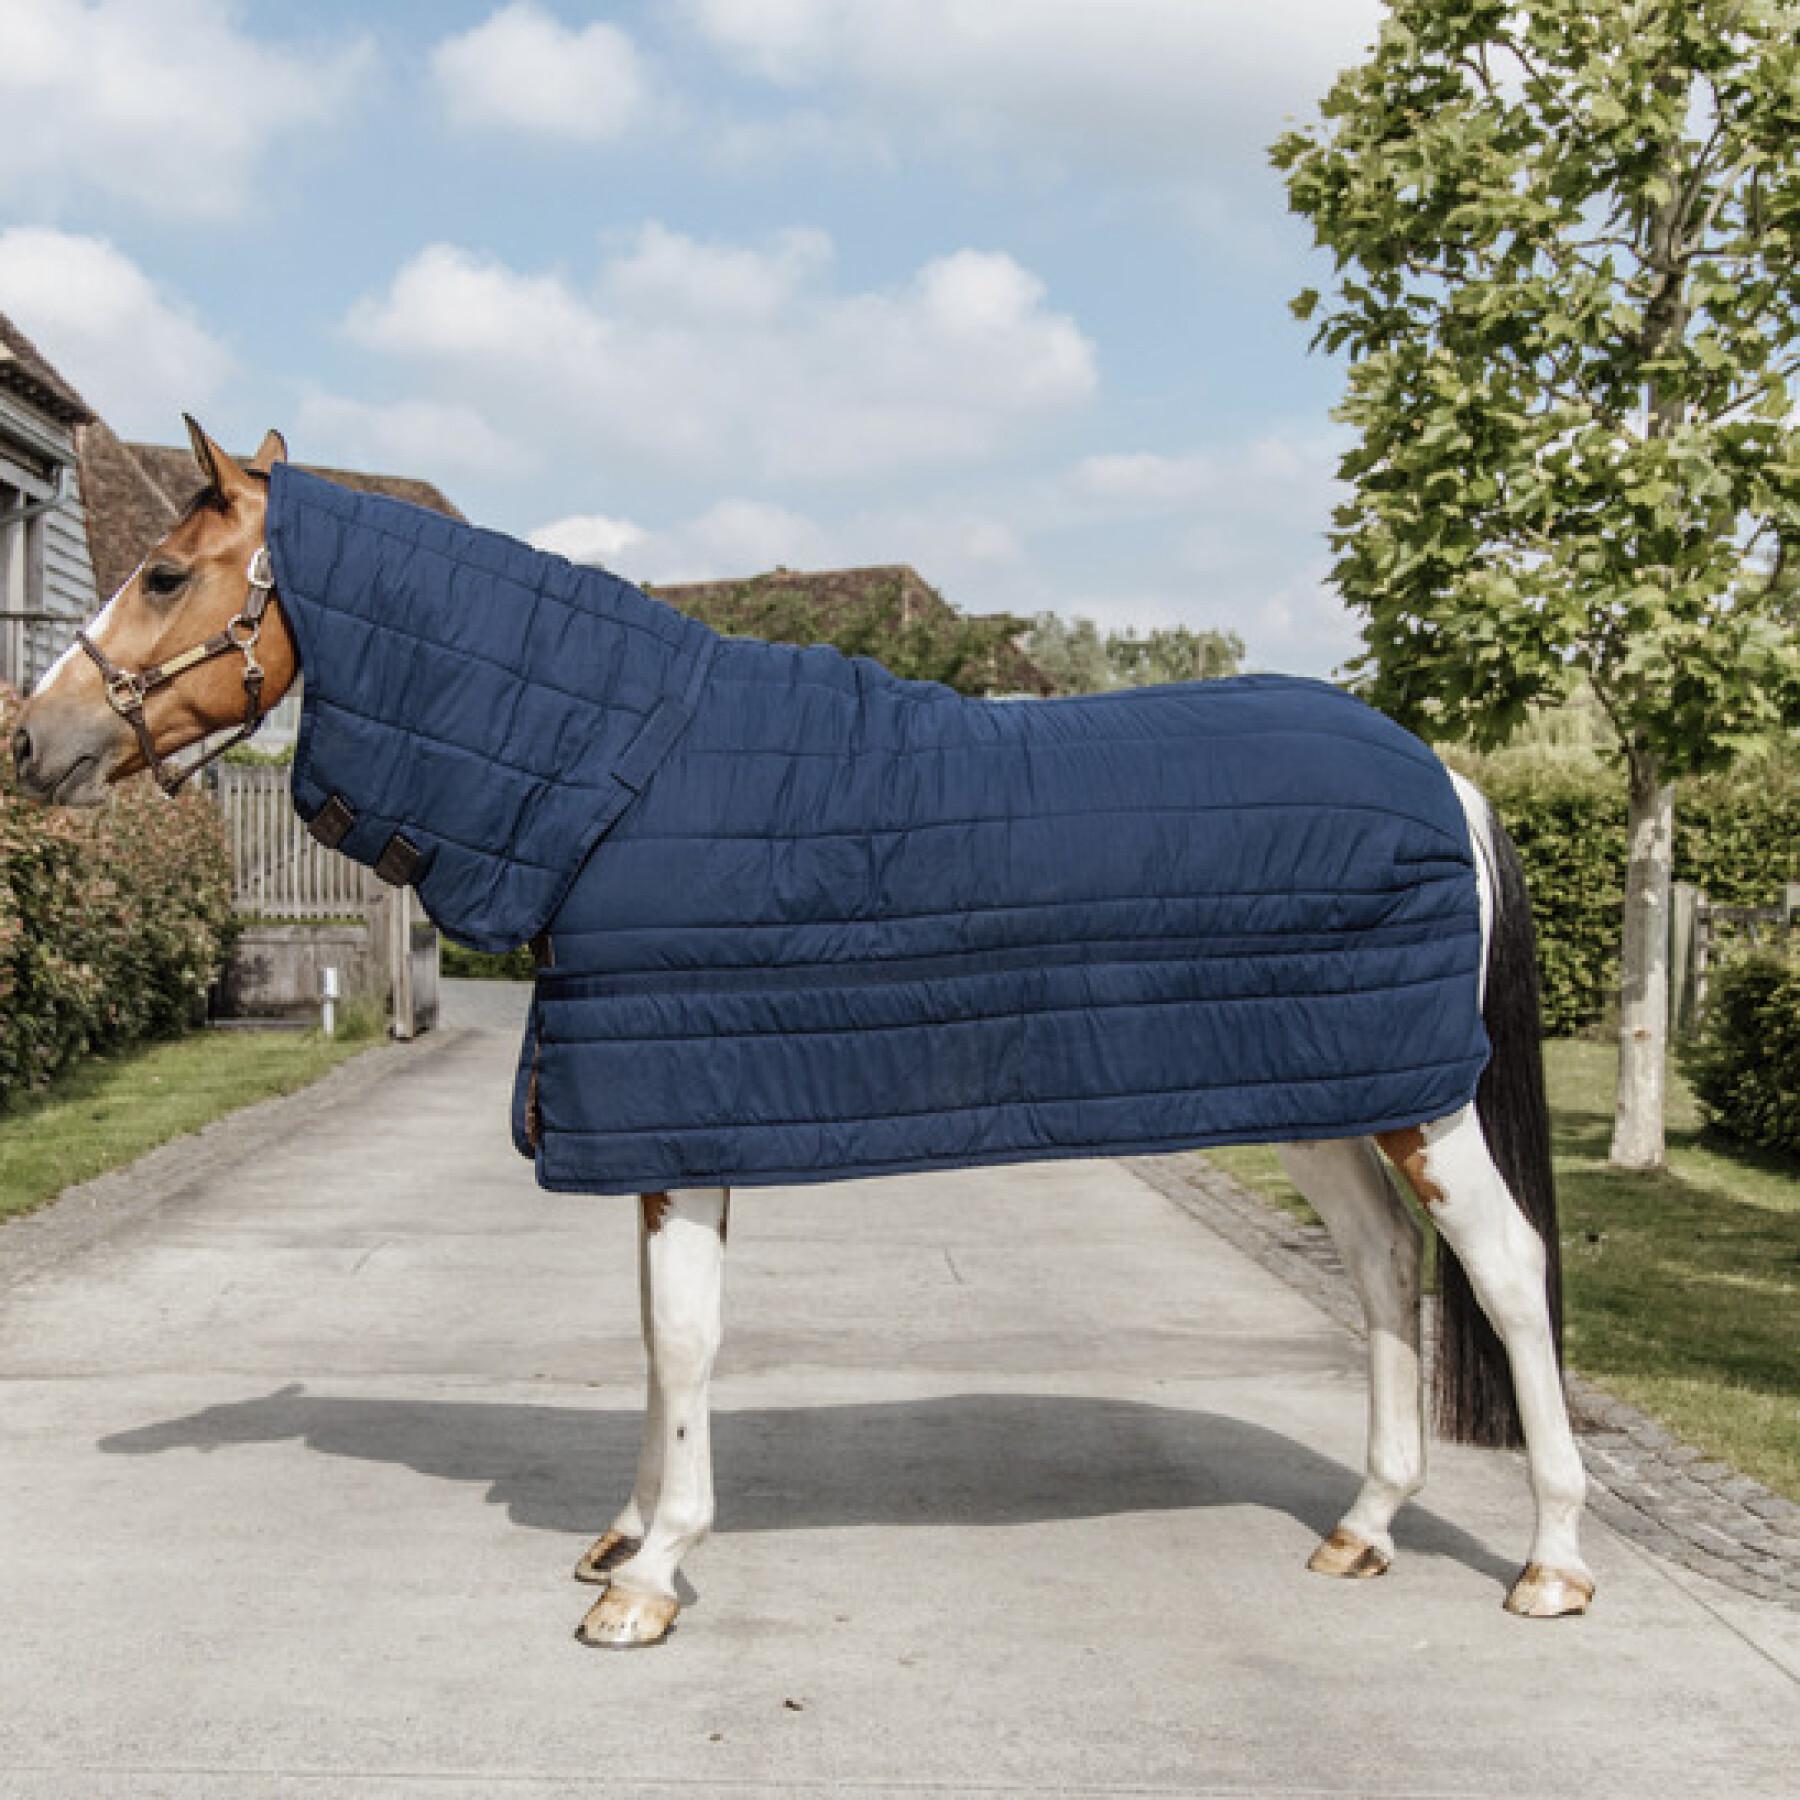 Underblanket for horse with neck cover Kentucky Skin Friendly 150g